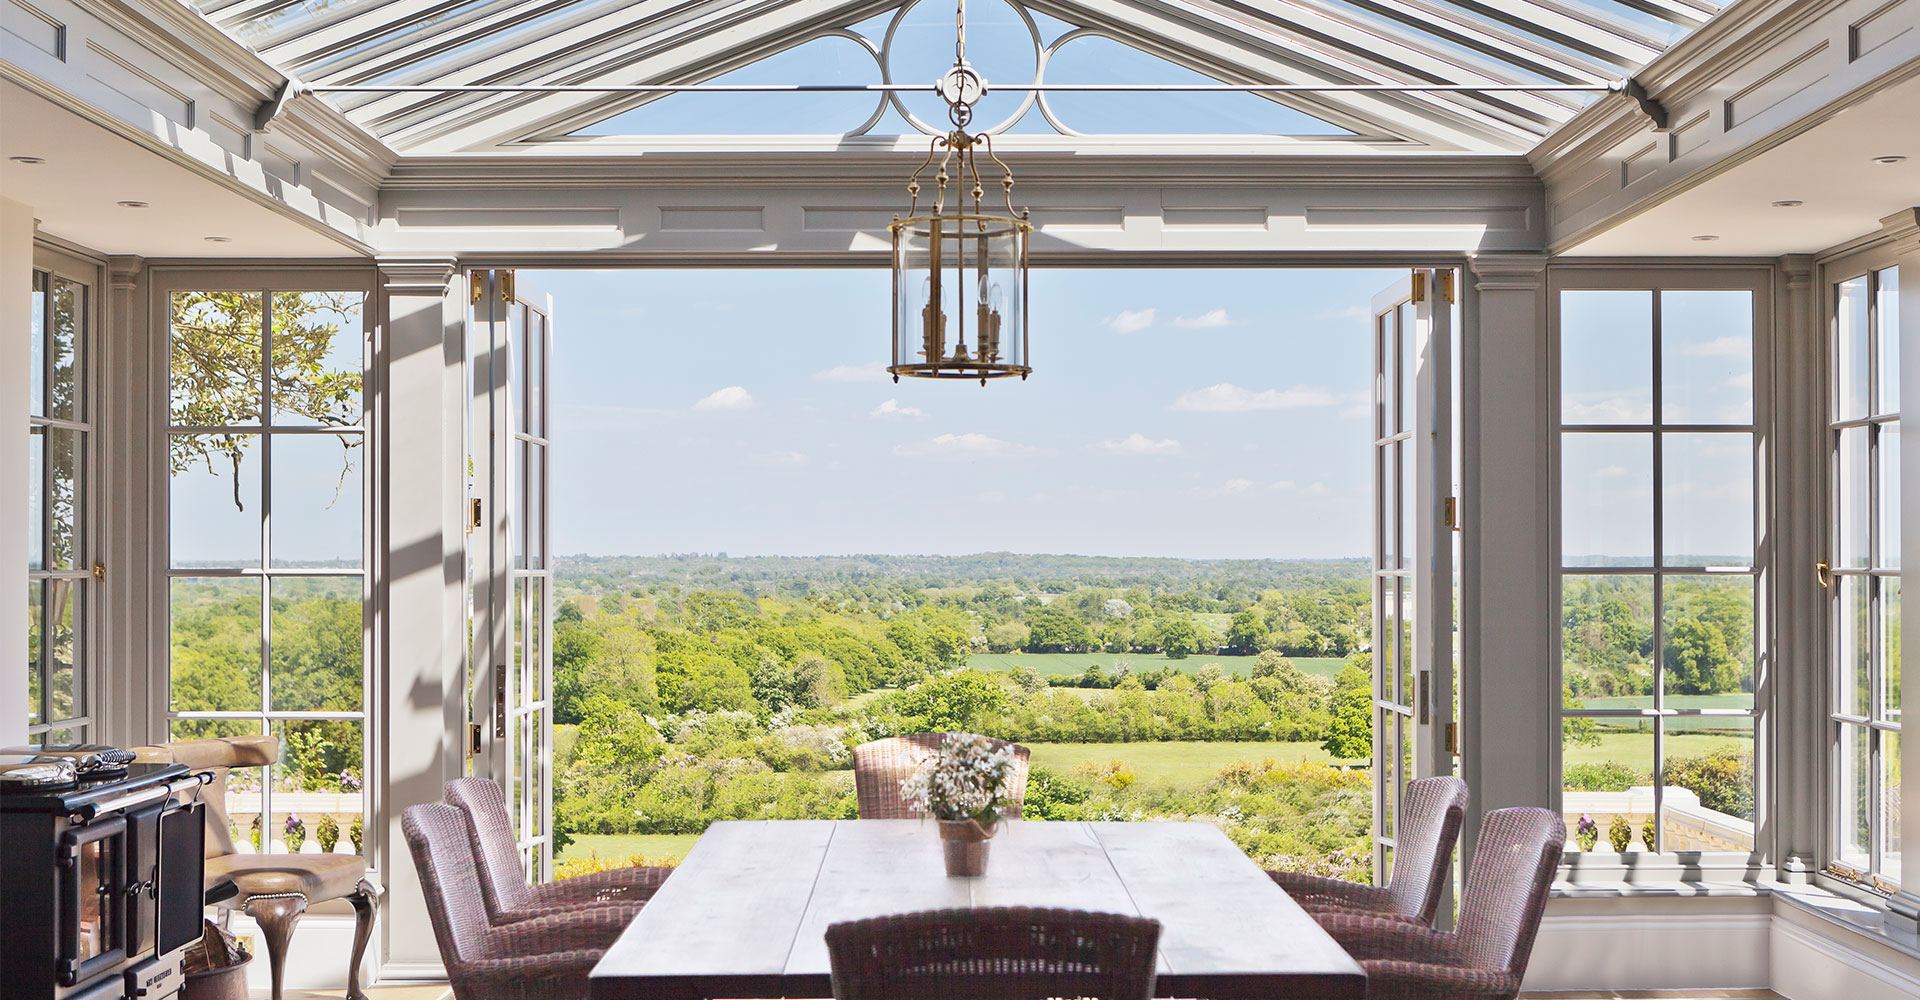 Orangery with a spectacular view